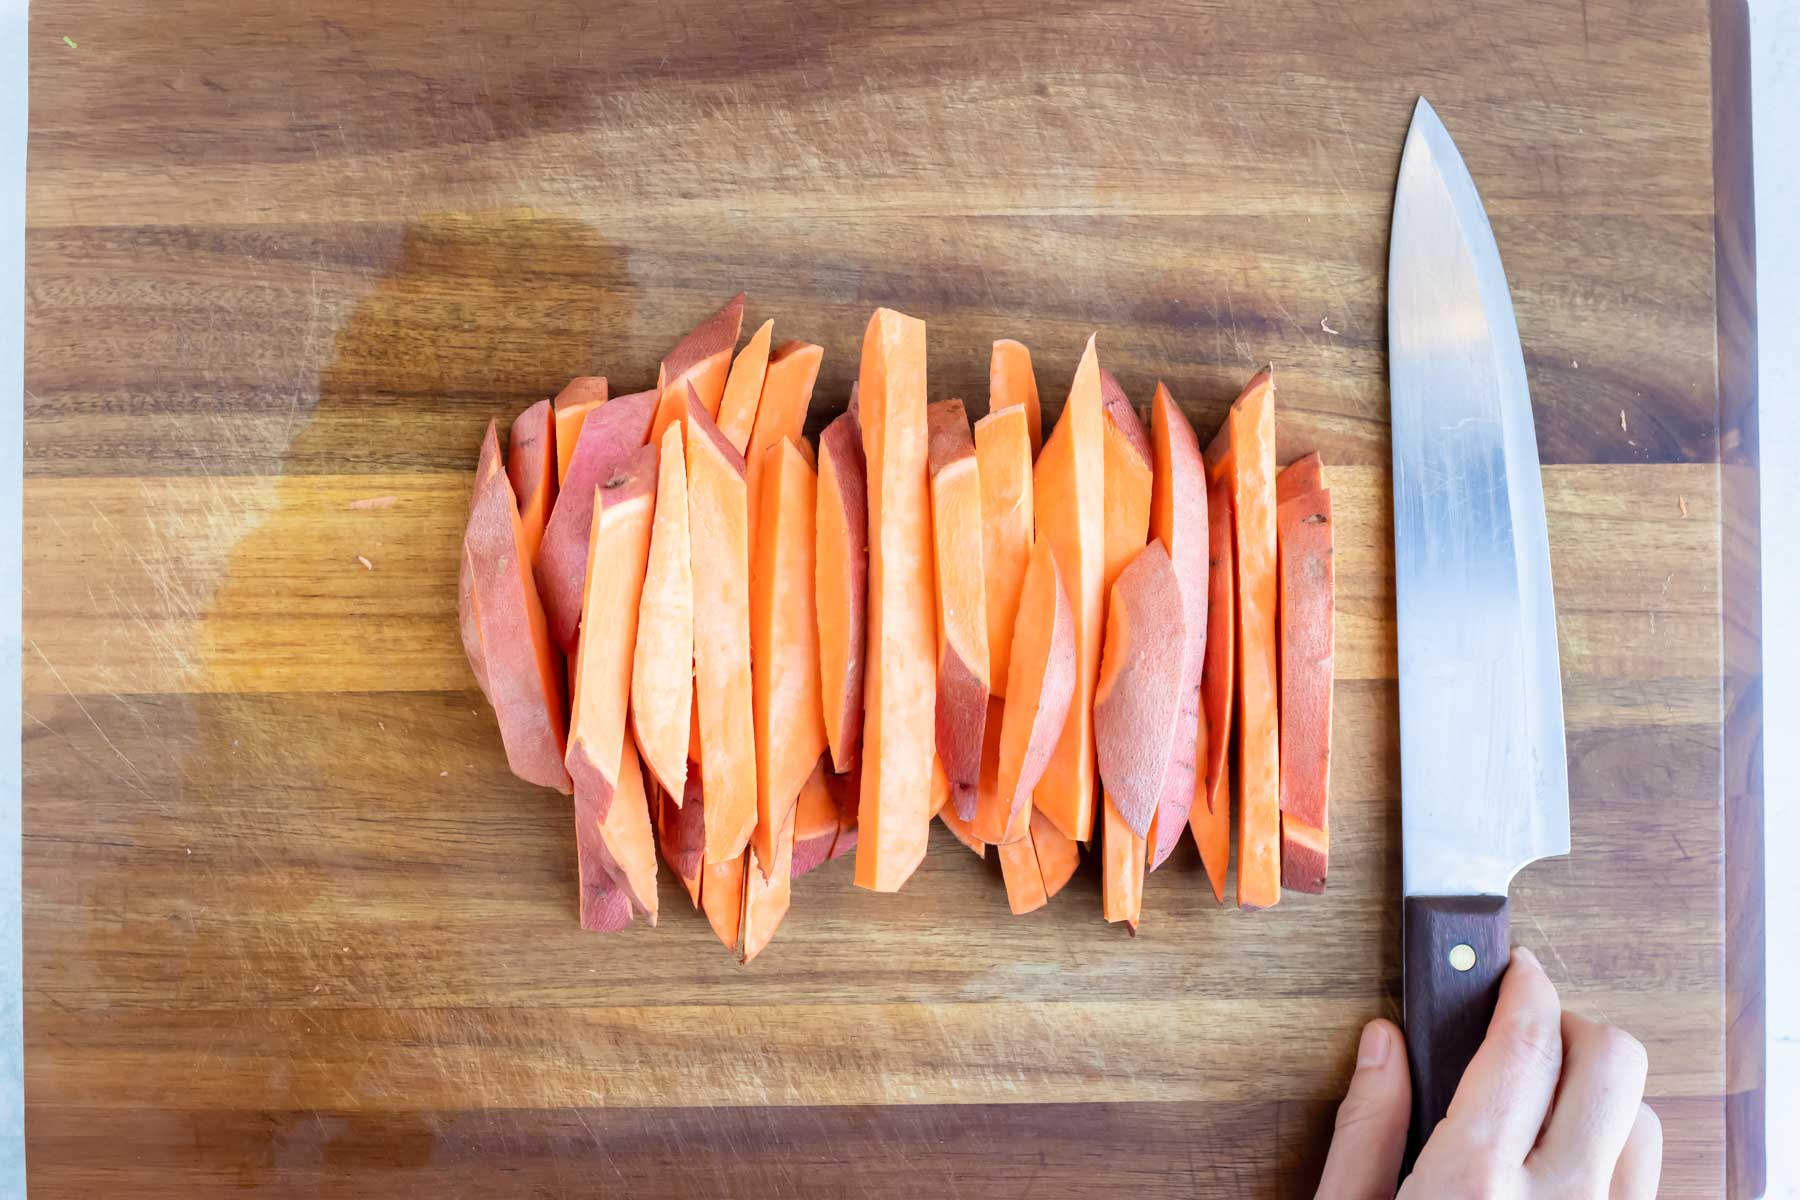 Sweet potatoes are cut into slices on a cutting board.